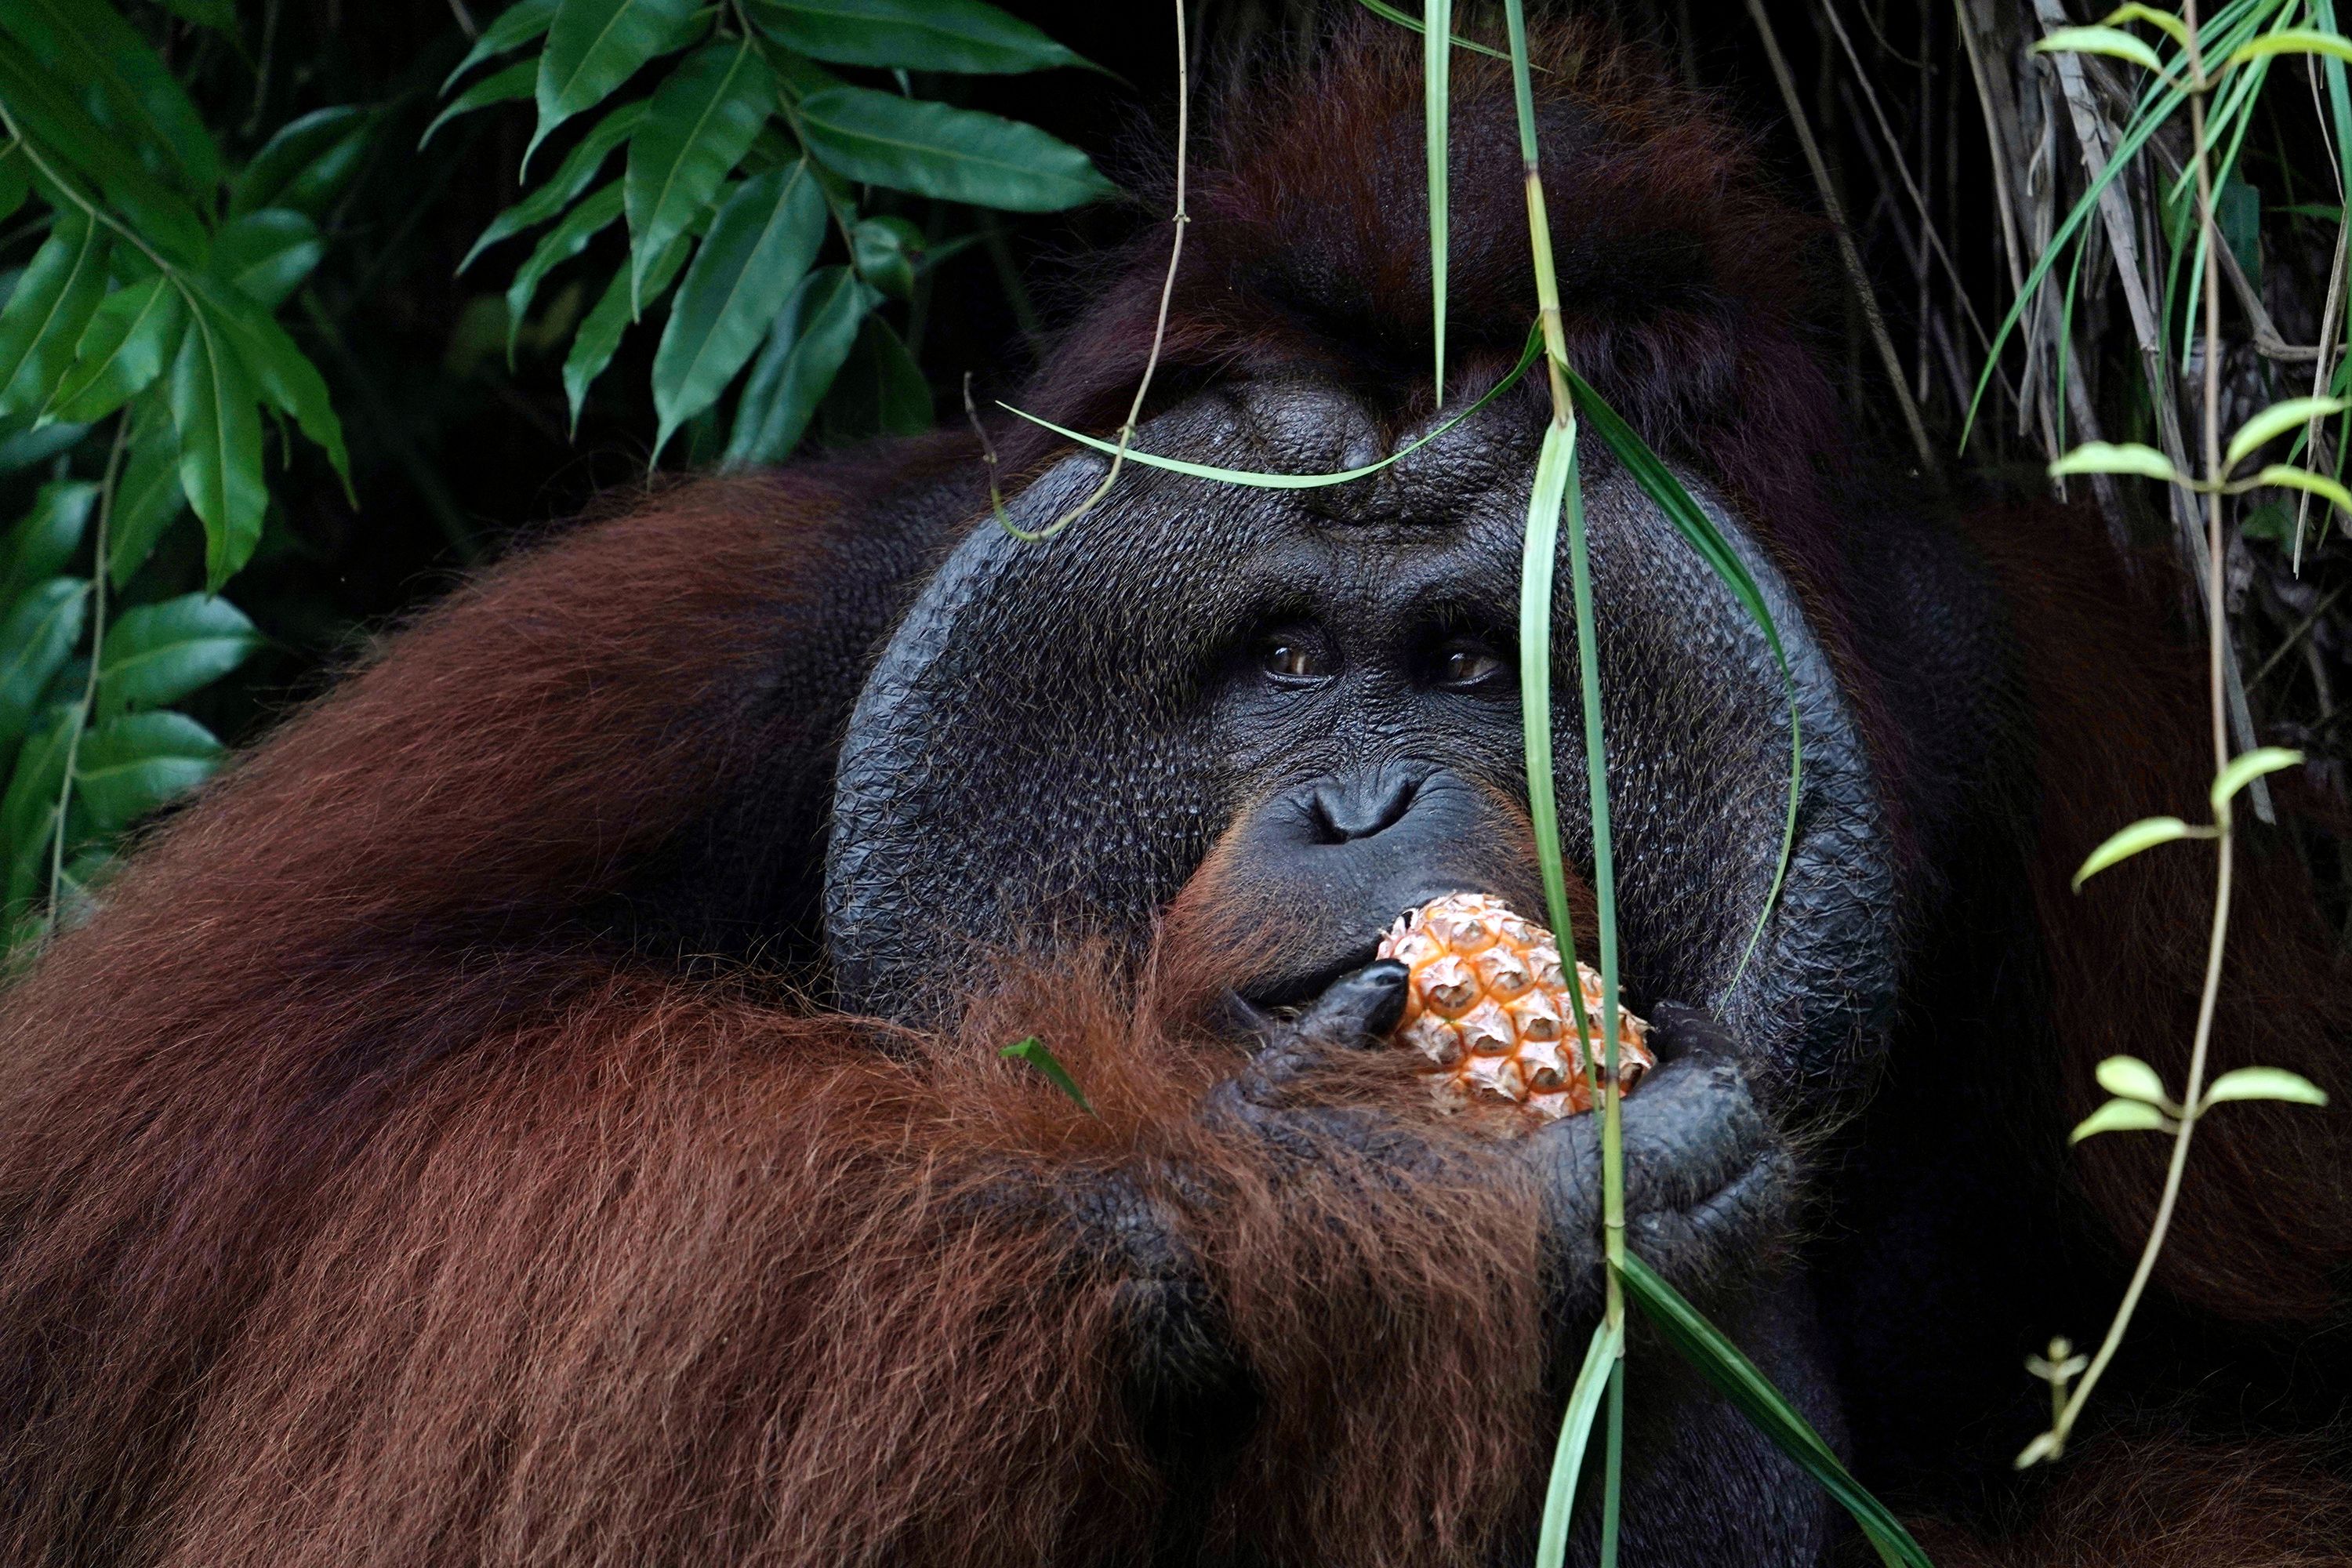 Indonesia's new forest capital in Borneo heightens fears for orangutans'  future | CNN